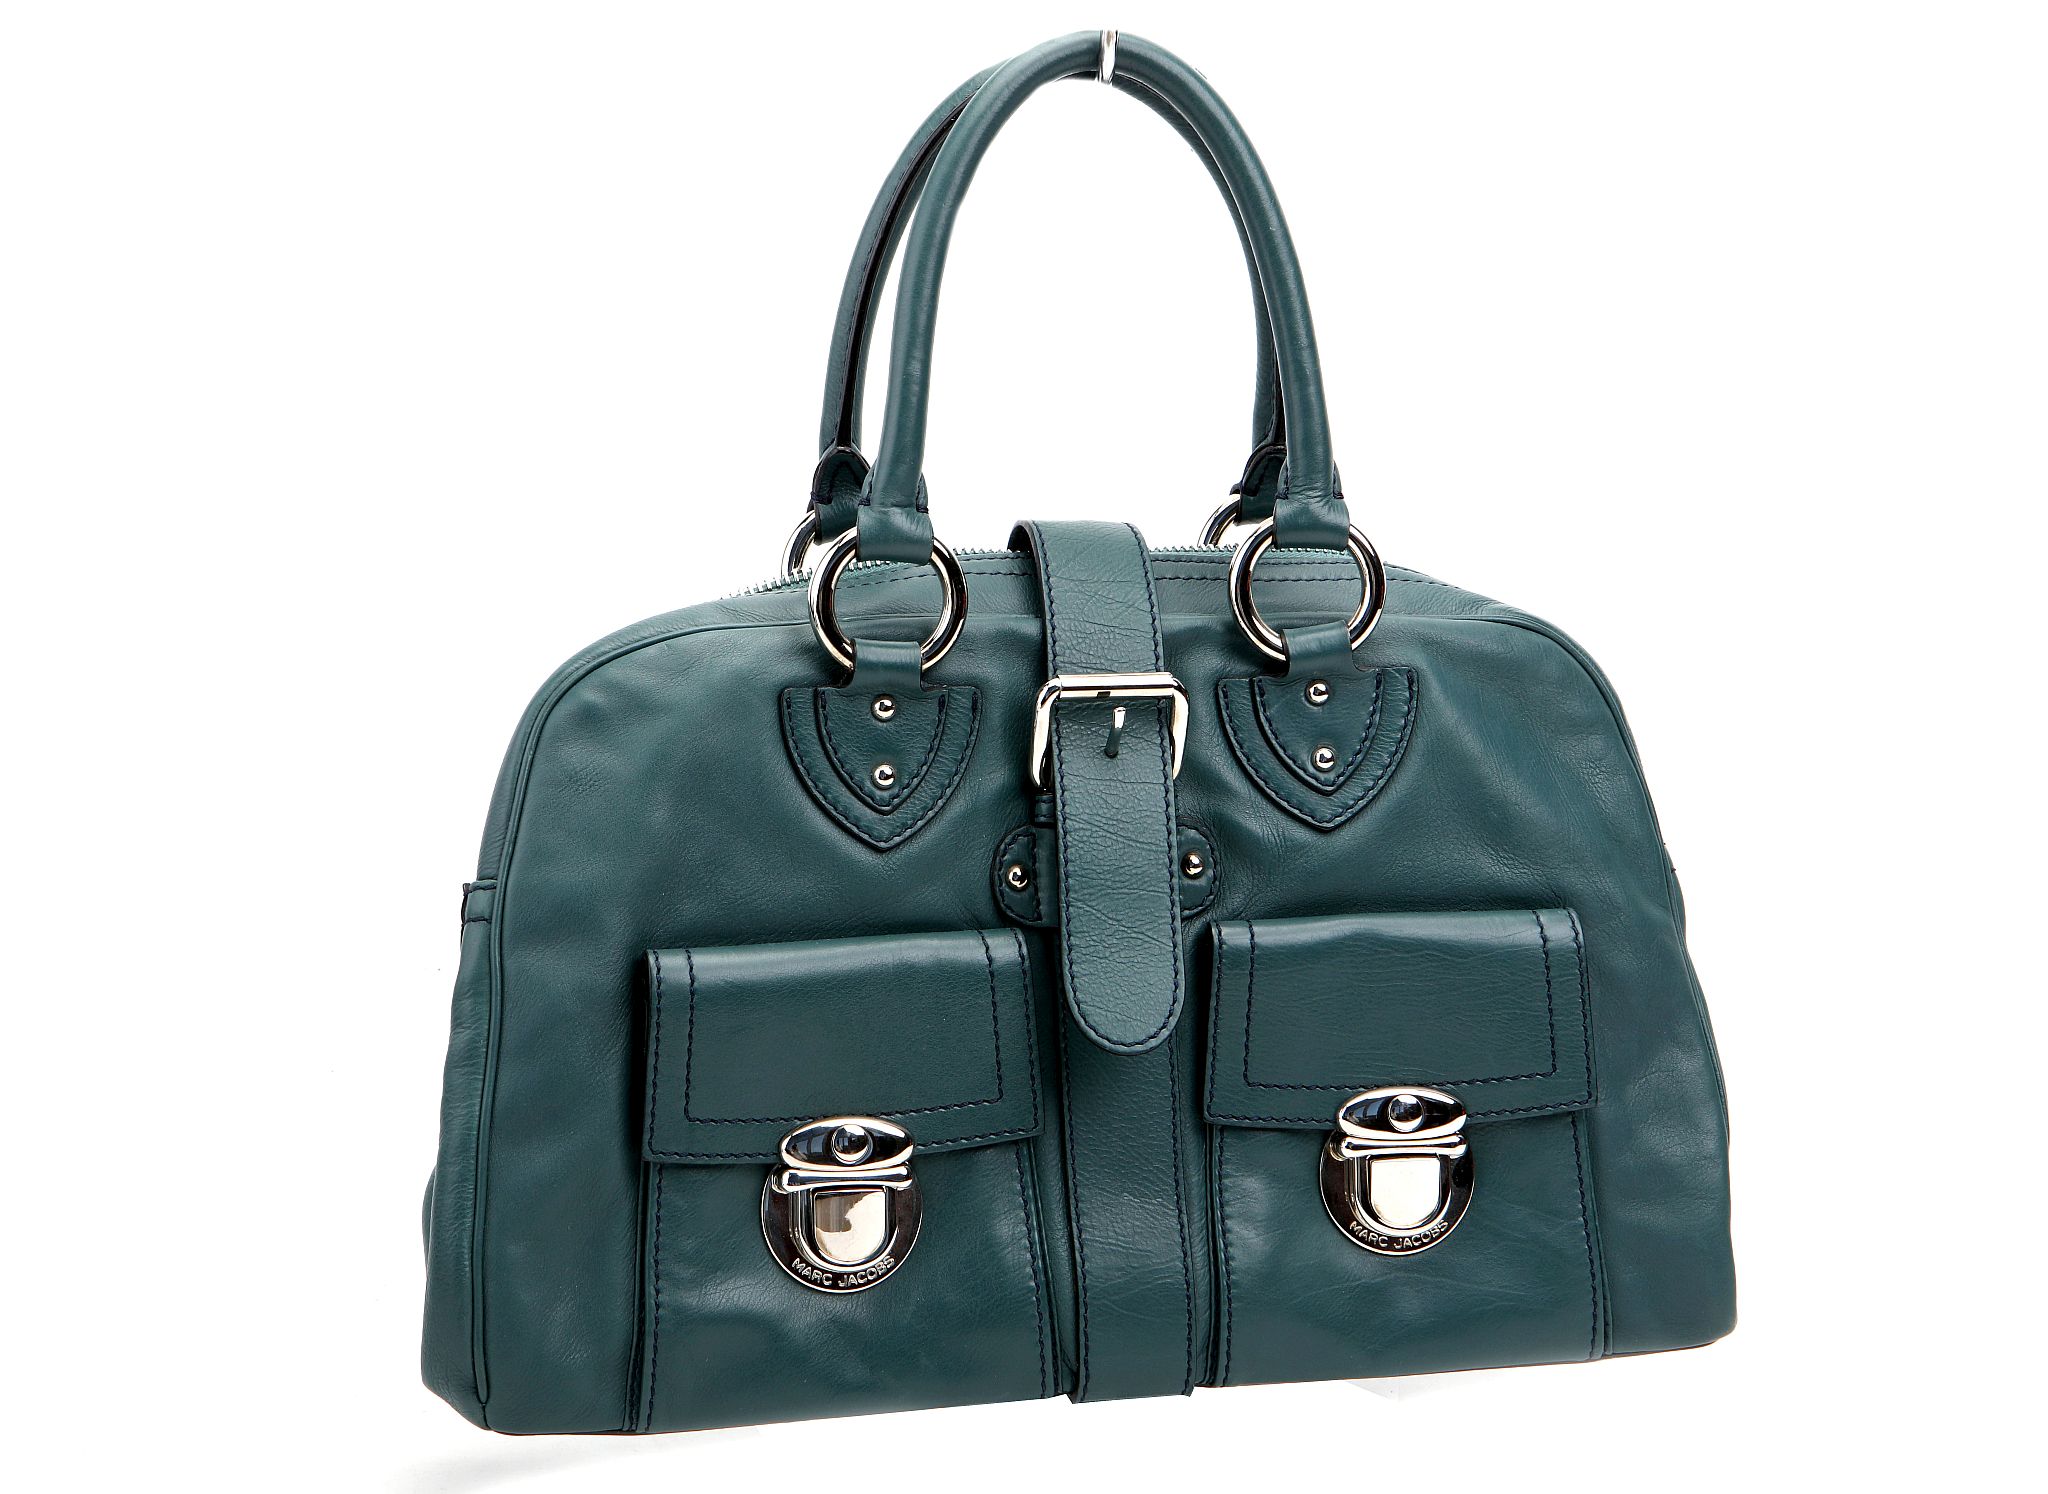 MARC JACOBS VENETIA HANDBAG, teal leather with silver hardware, 38cm wide, 23cm high, with dust bag